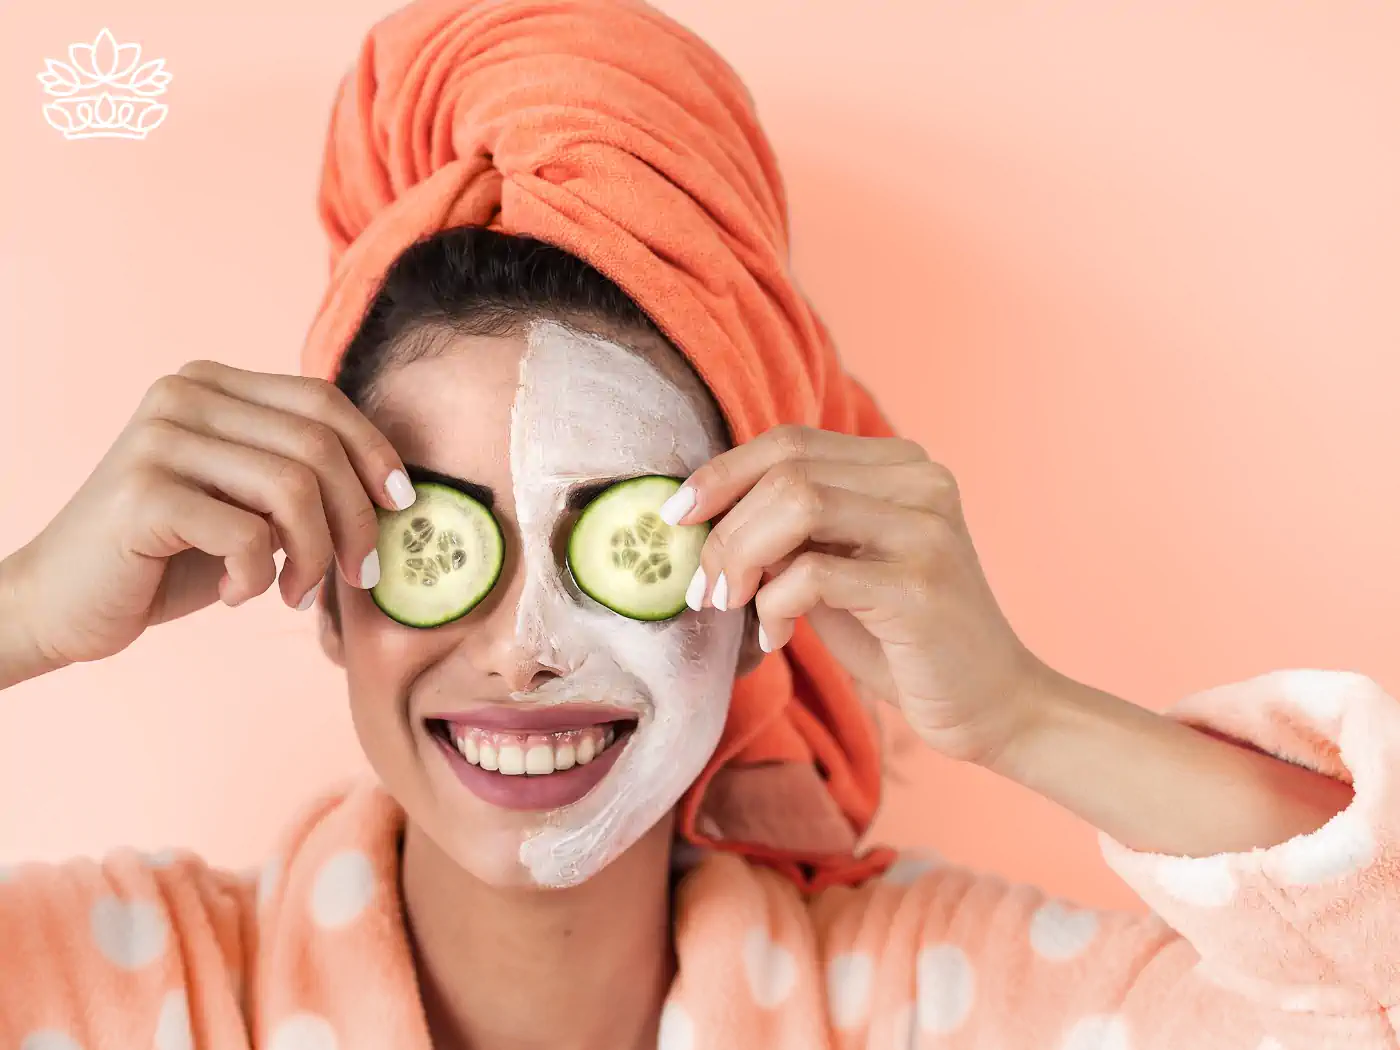 Woman with an orange towel and a face mask holding cucumber slices over her eyes, showing a fun and relaxing beauty routine. Fabulous Flowers and Gifts.